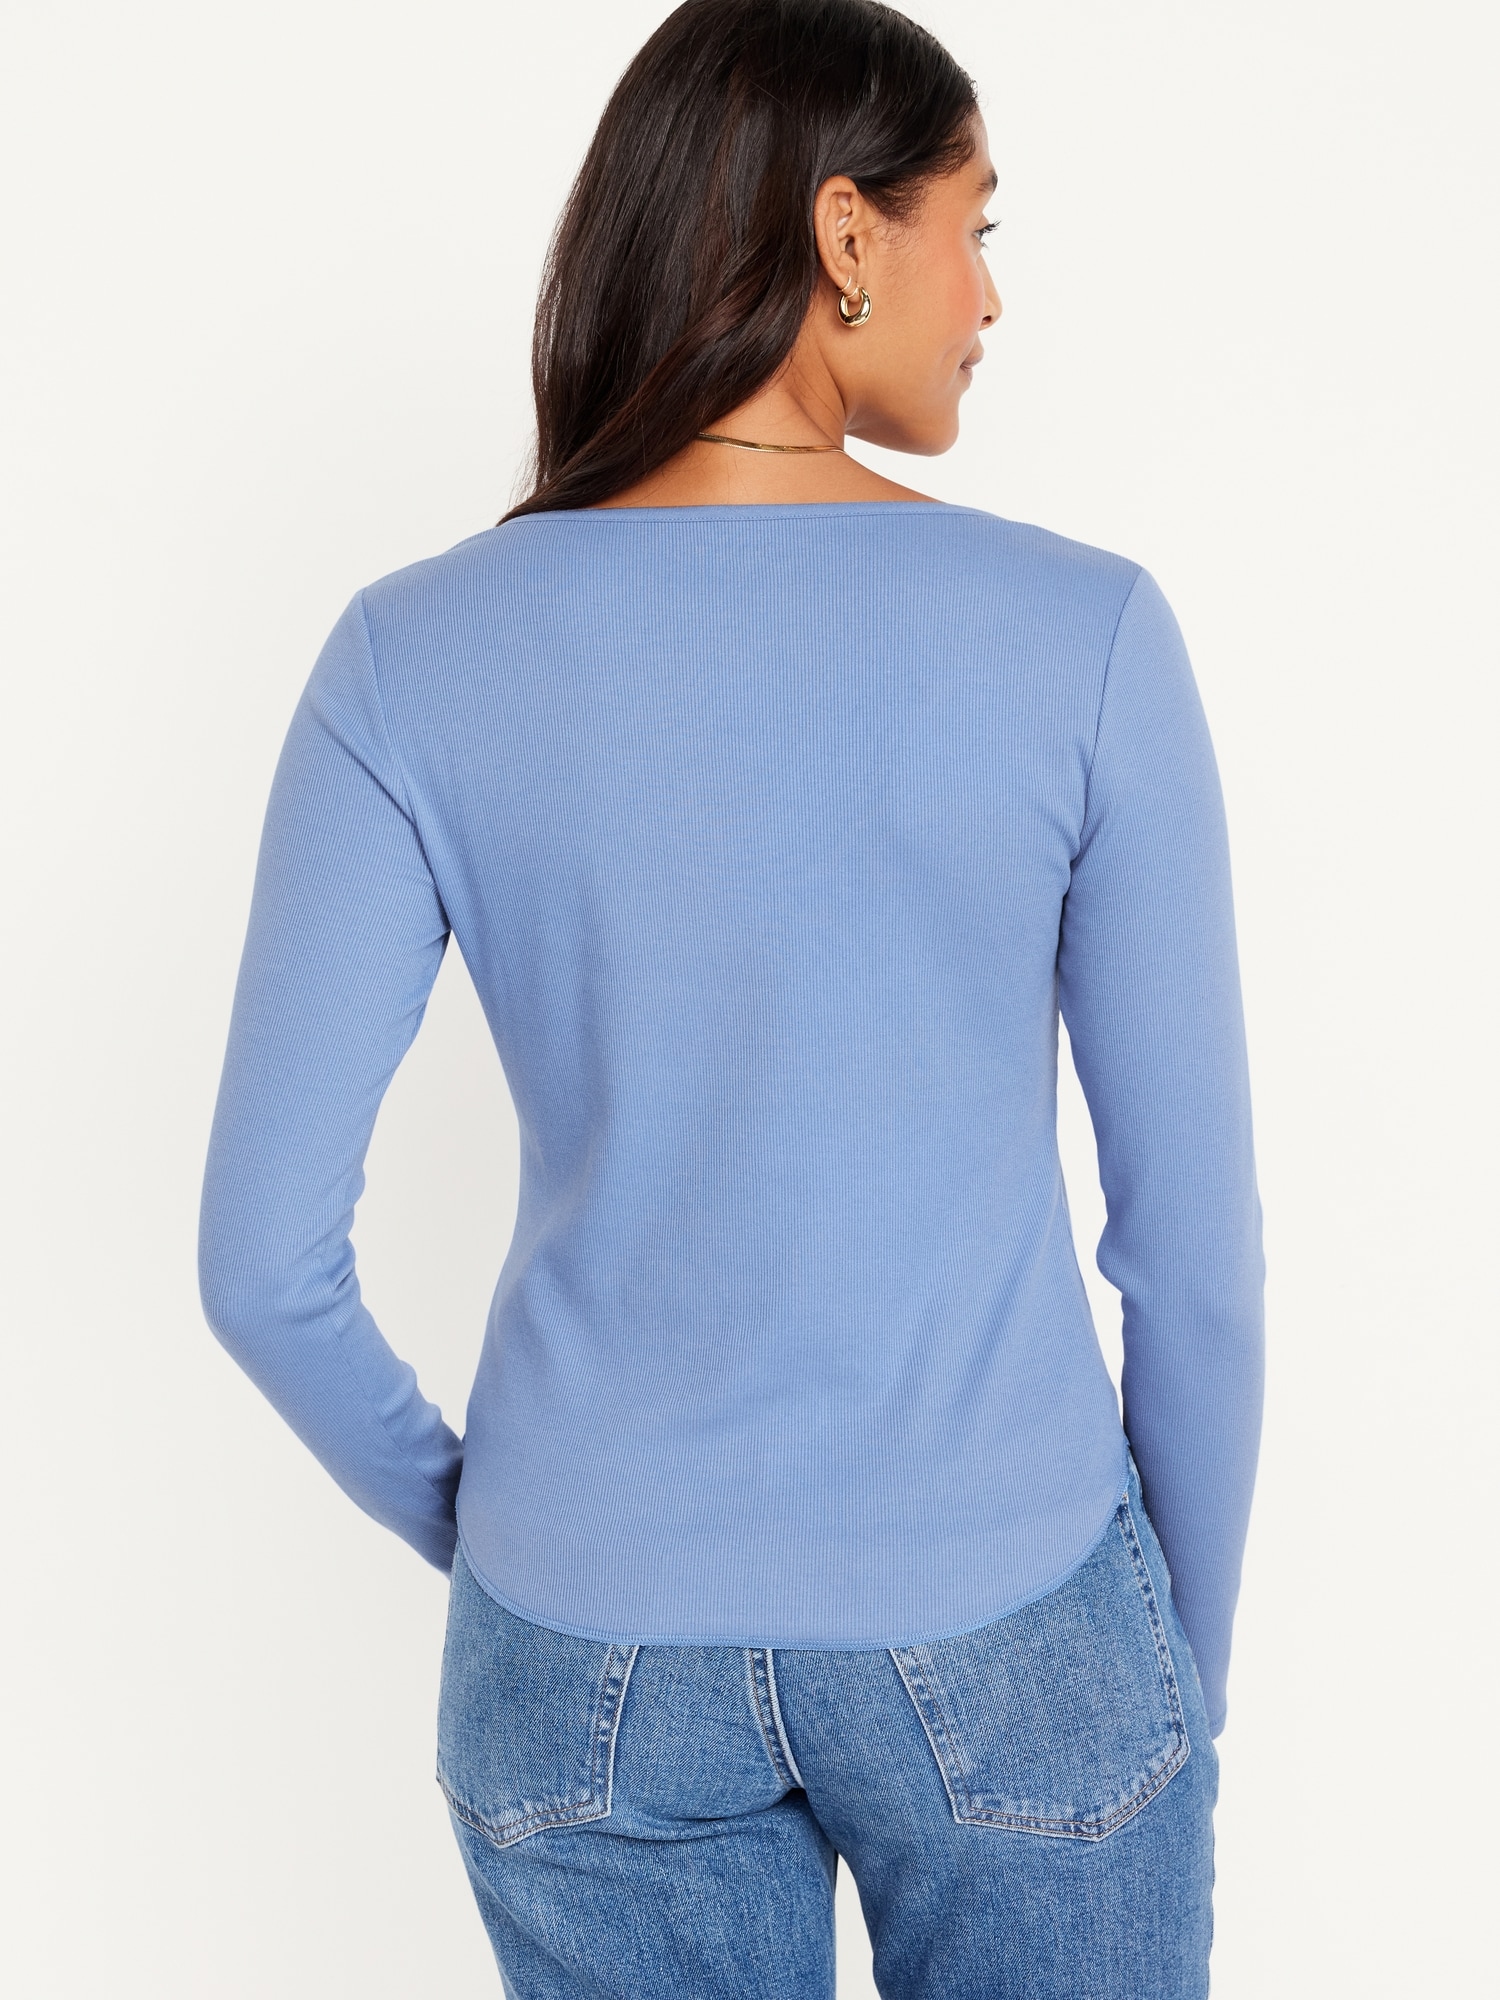 Fitted Long-Sleeve Old | Women Rib-Knit Navy T-Shirt for